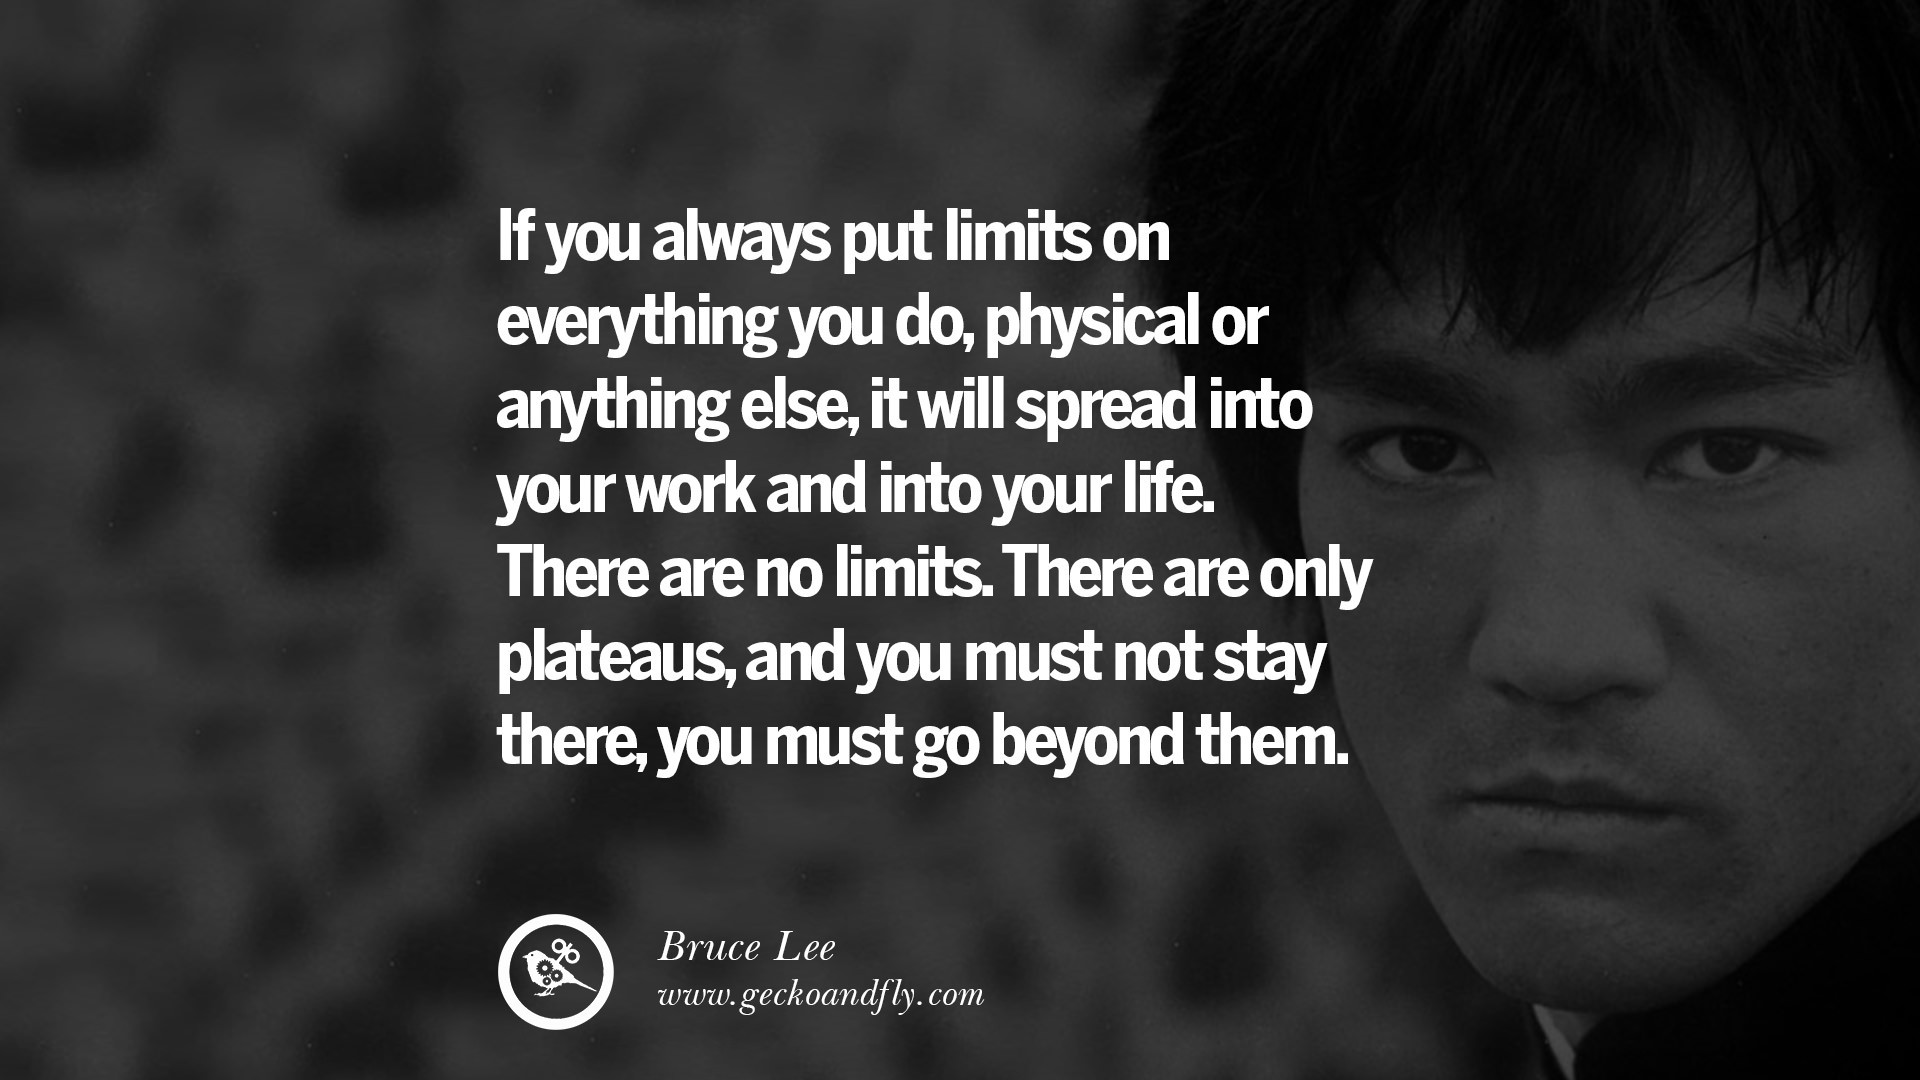 Bruce Lee Motivational Quotes
 25 Inspirational Quotes from Bruce Lee s Martial Arts Movie